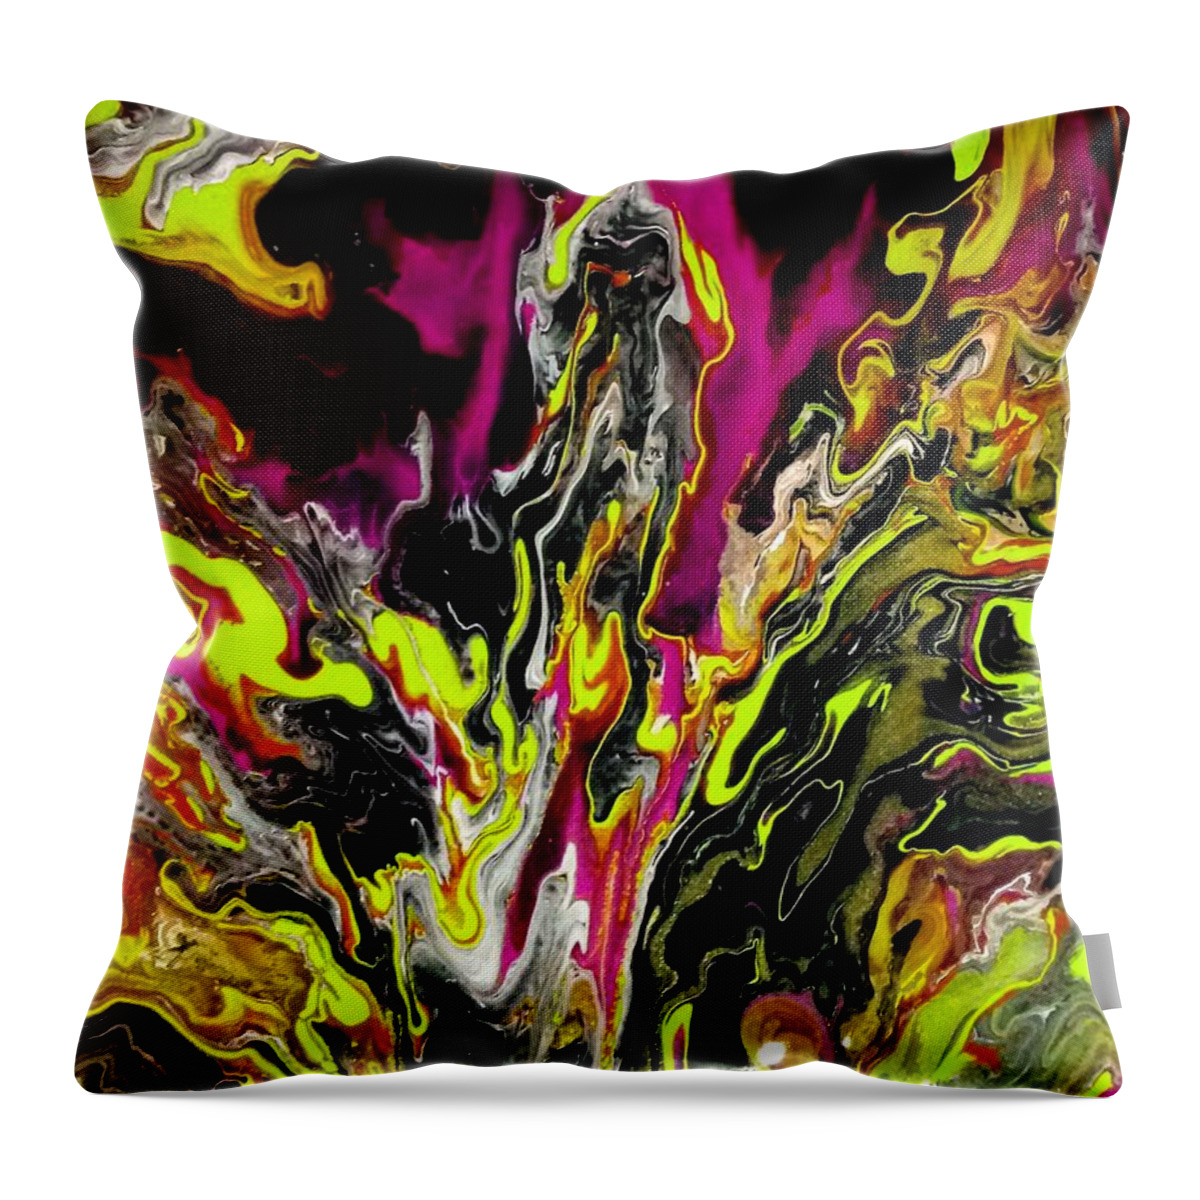 Bright Throw Pillow featuring the painting Wild Night by Anna Adams